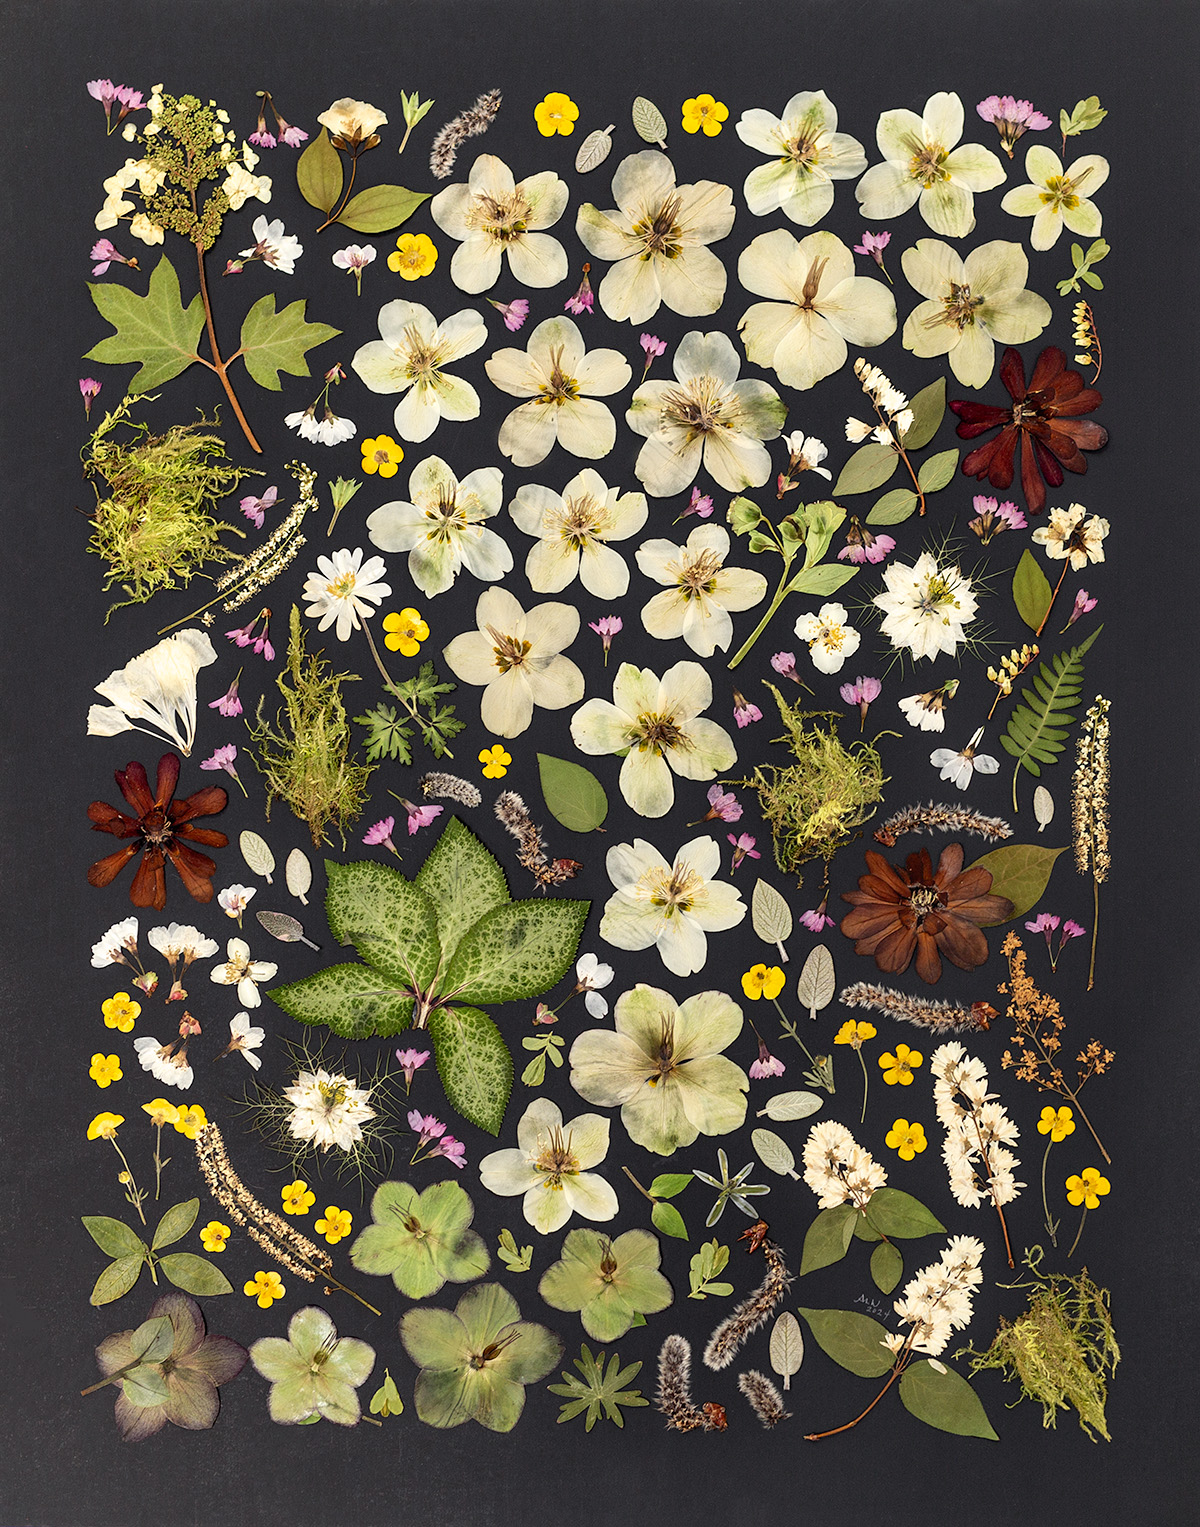 Pressed flower art by Angie Windheim with cream-colored hellebores appearing to drift as if in a day dream.